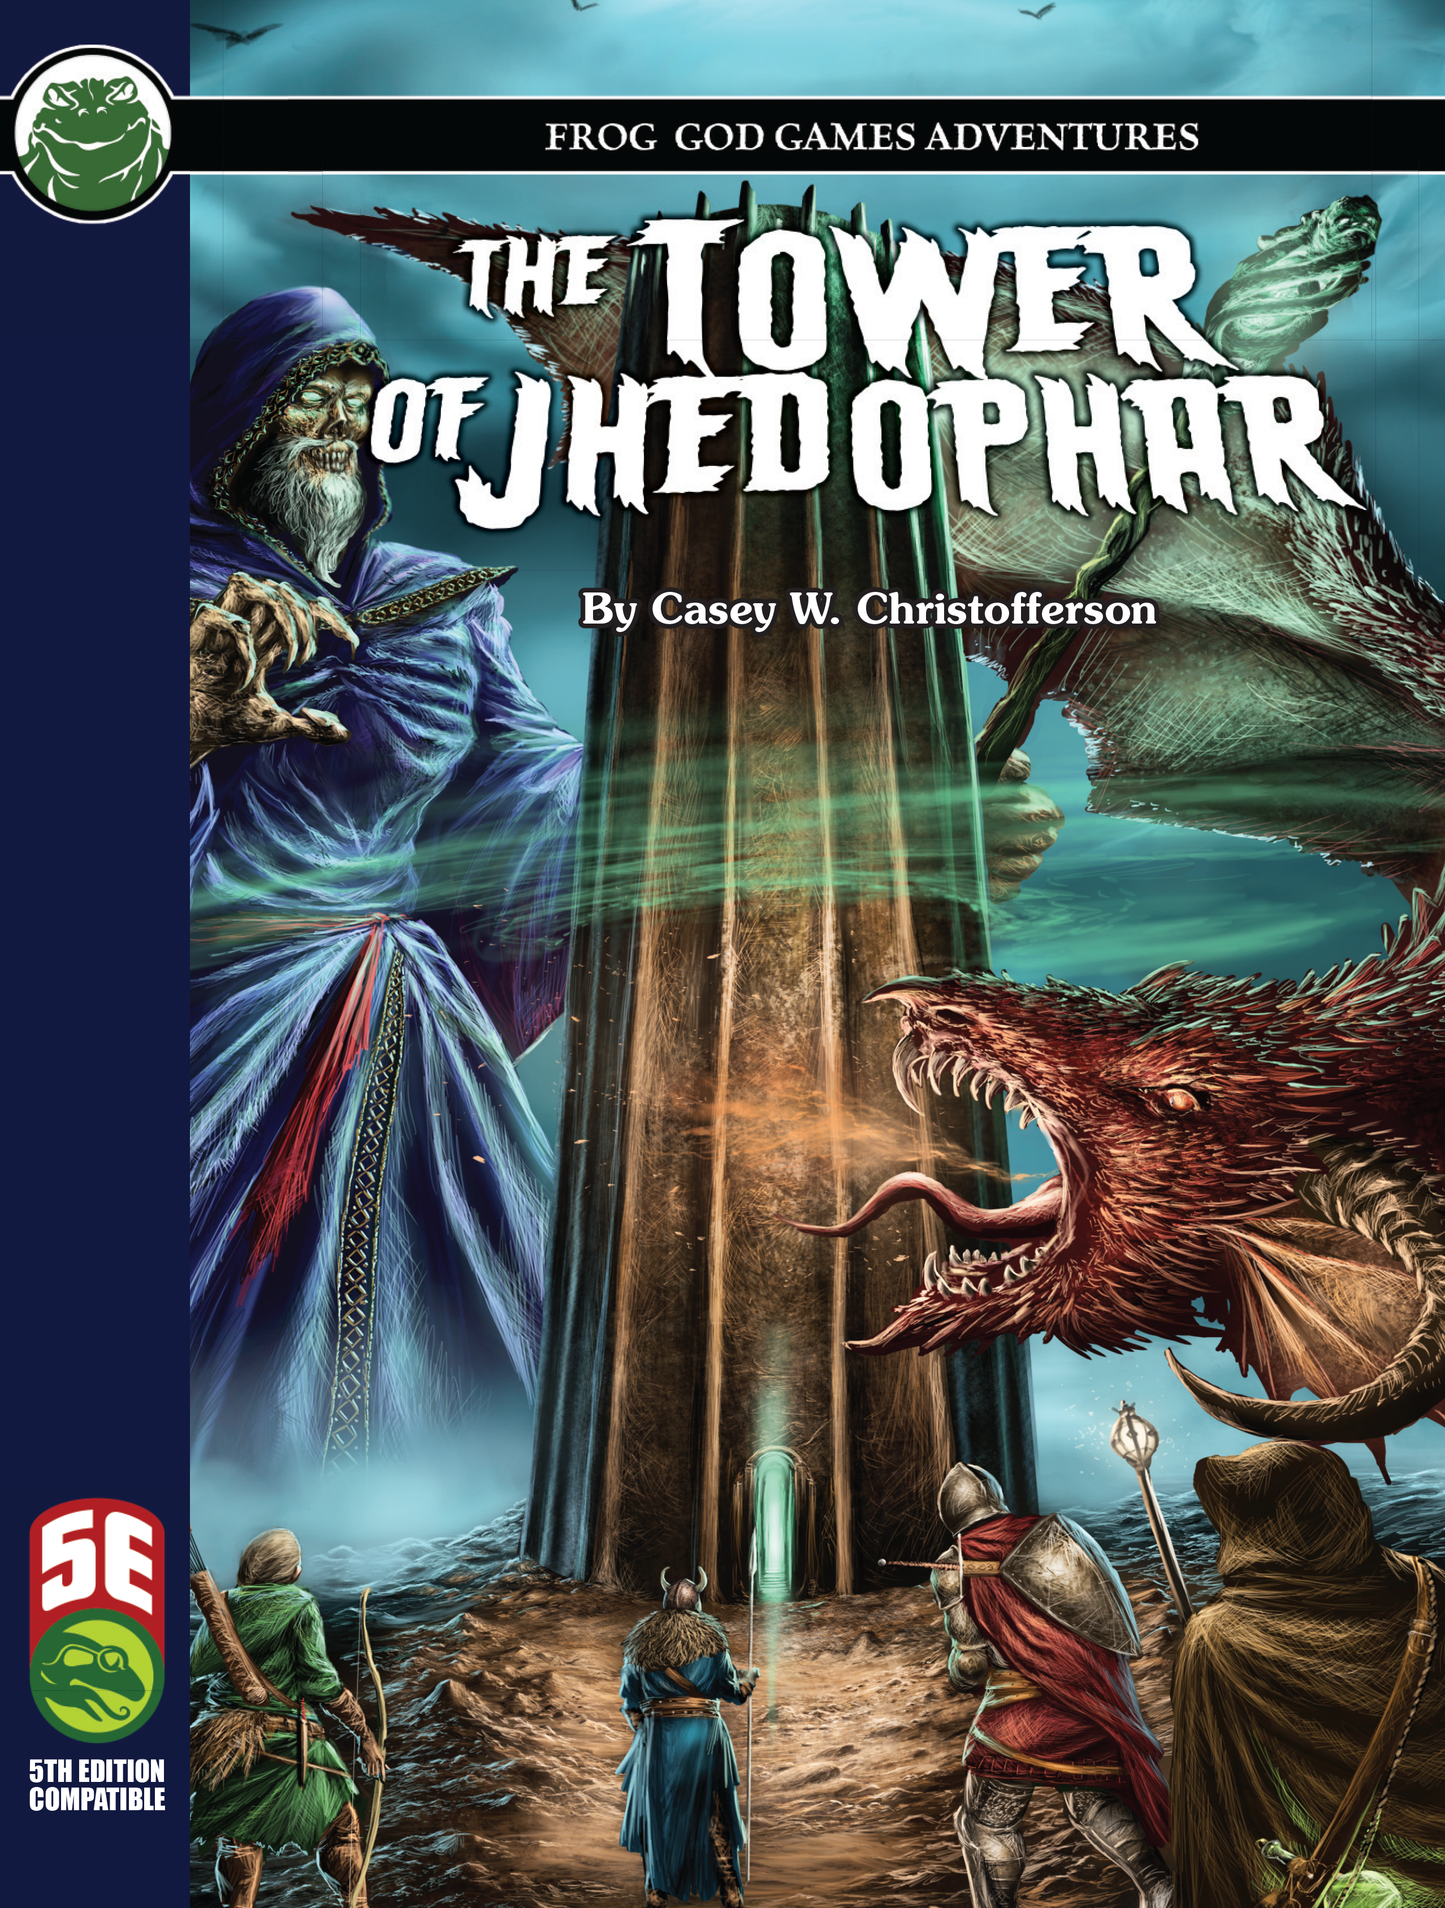 The Tower of Jhedophar 2020